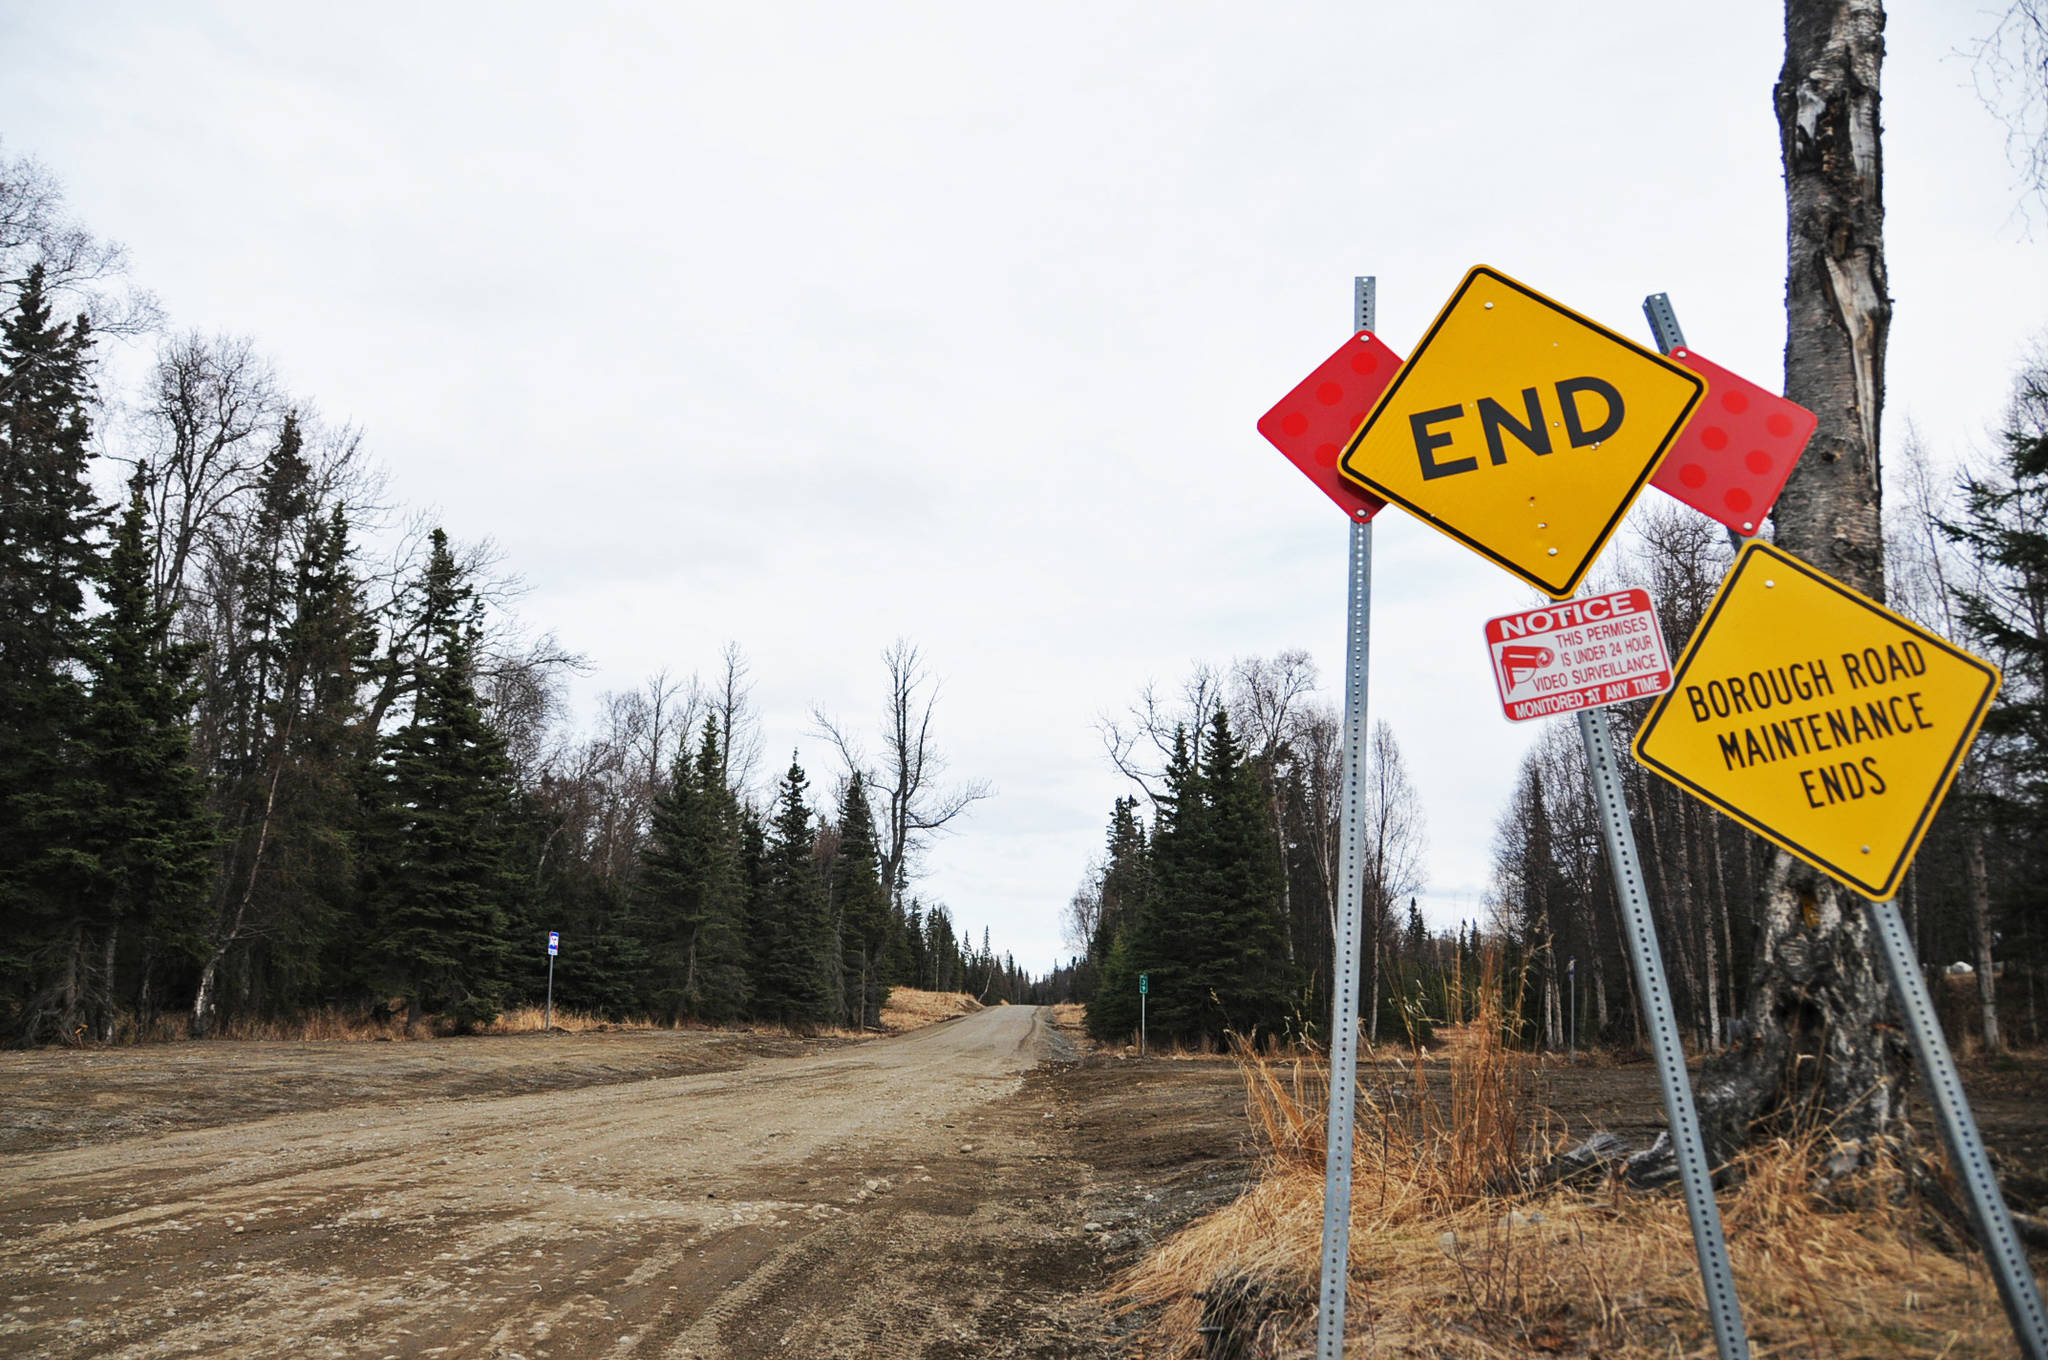 The road to Gray Cliff and Moose Point extends past the pavement in Captain Cook State Park, shown on Monday, April 11, 2016 near Nikiski, Alaska. Apache Corporation, which was exploring for oil and gas in the area, had announced plans to extend the road to Gray Cliff before the company’s withdrawal from Alaska in March 2016. The Kenai Peninsula Borough is working on plans to pick up the project and plans to go out to bid in the fall. (Elizabeth Earl/Peninsula Clarion, file)